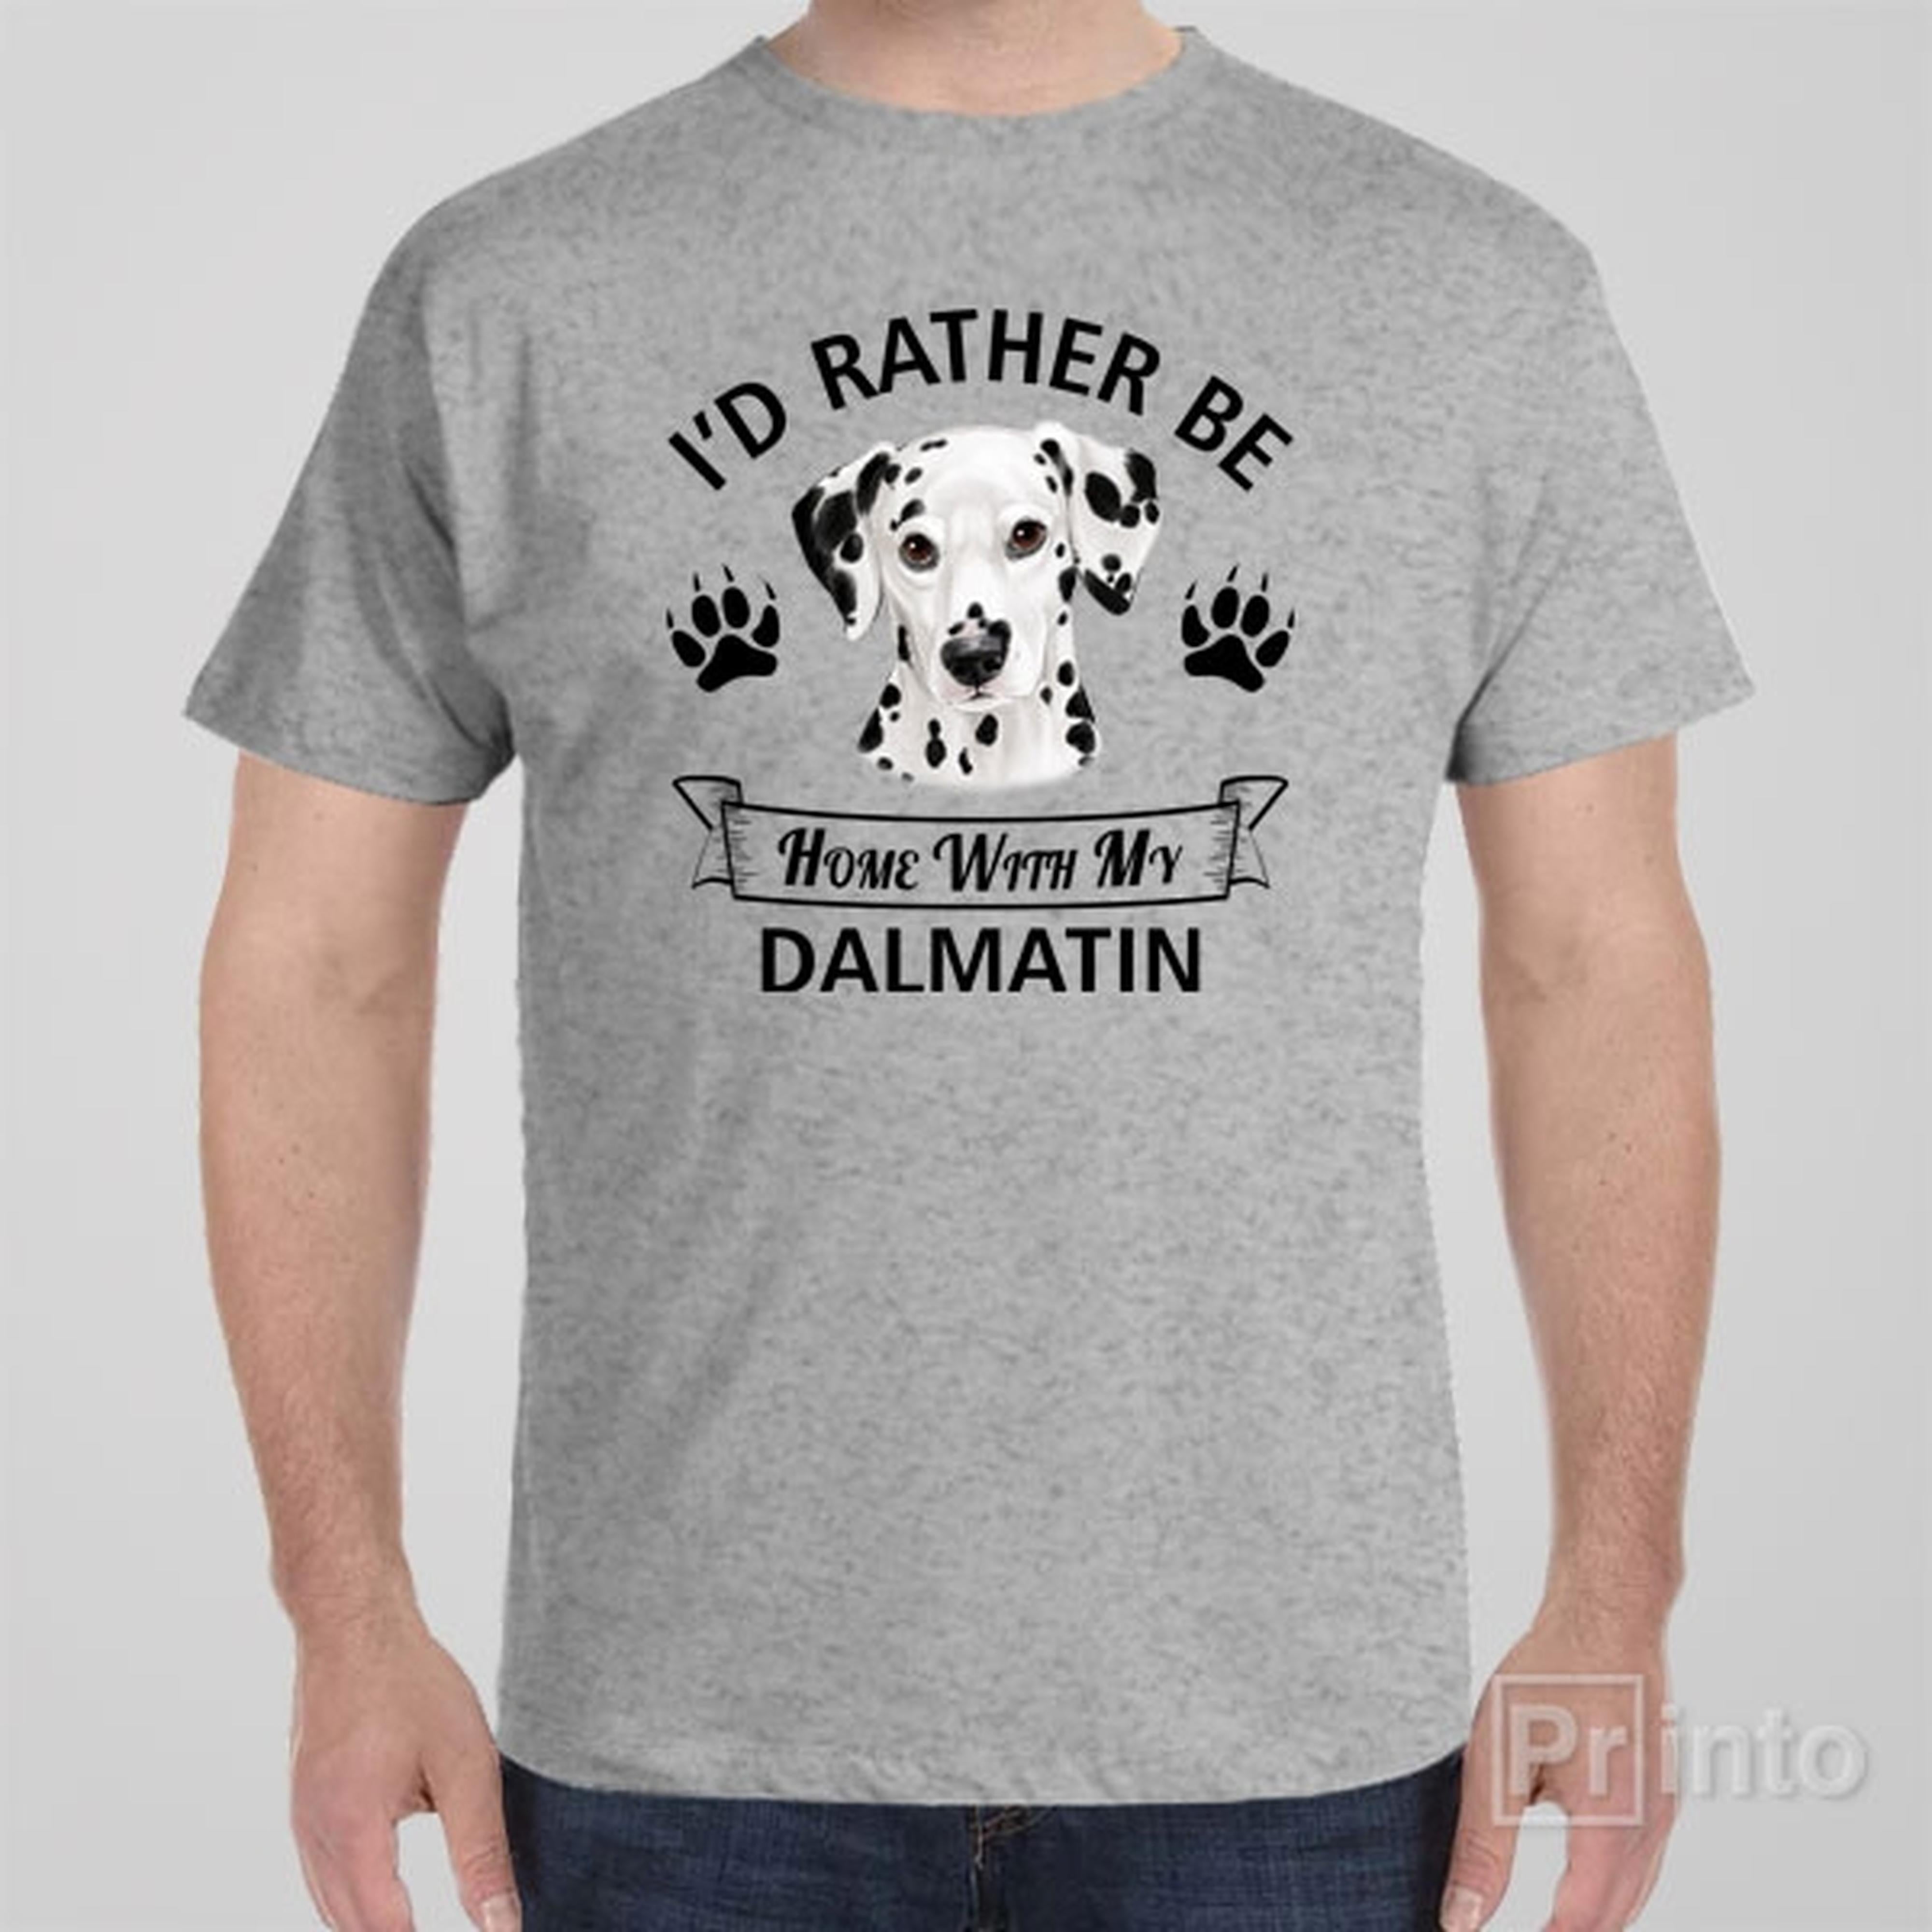 id-rather-stay-home-with-my-dalmatian-t-shirt